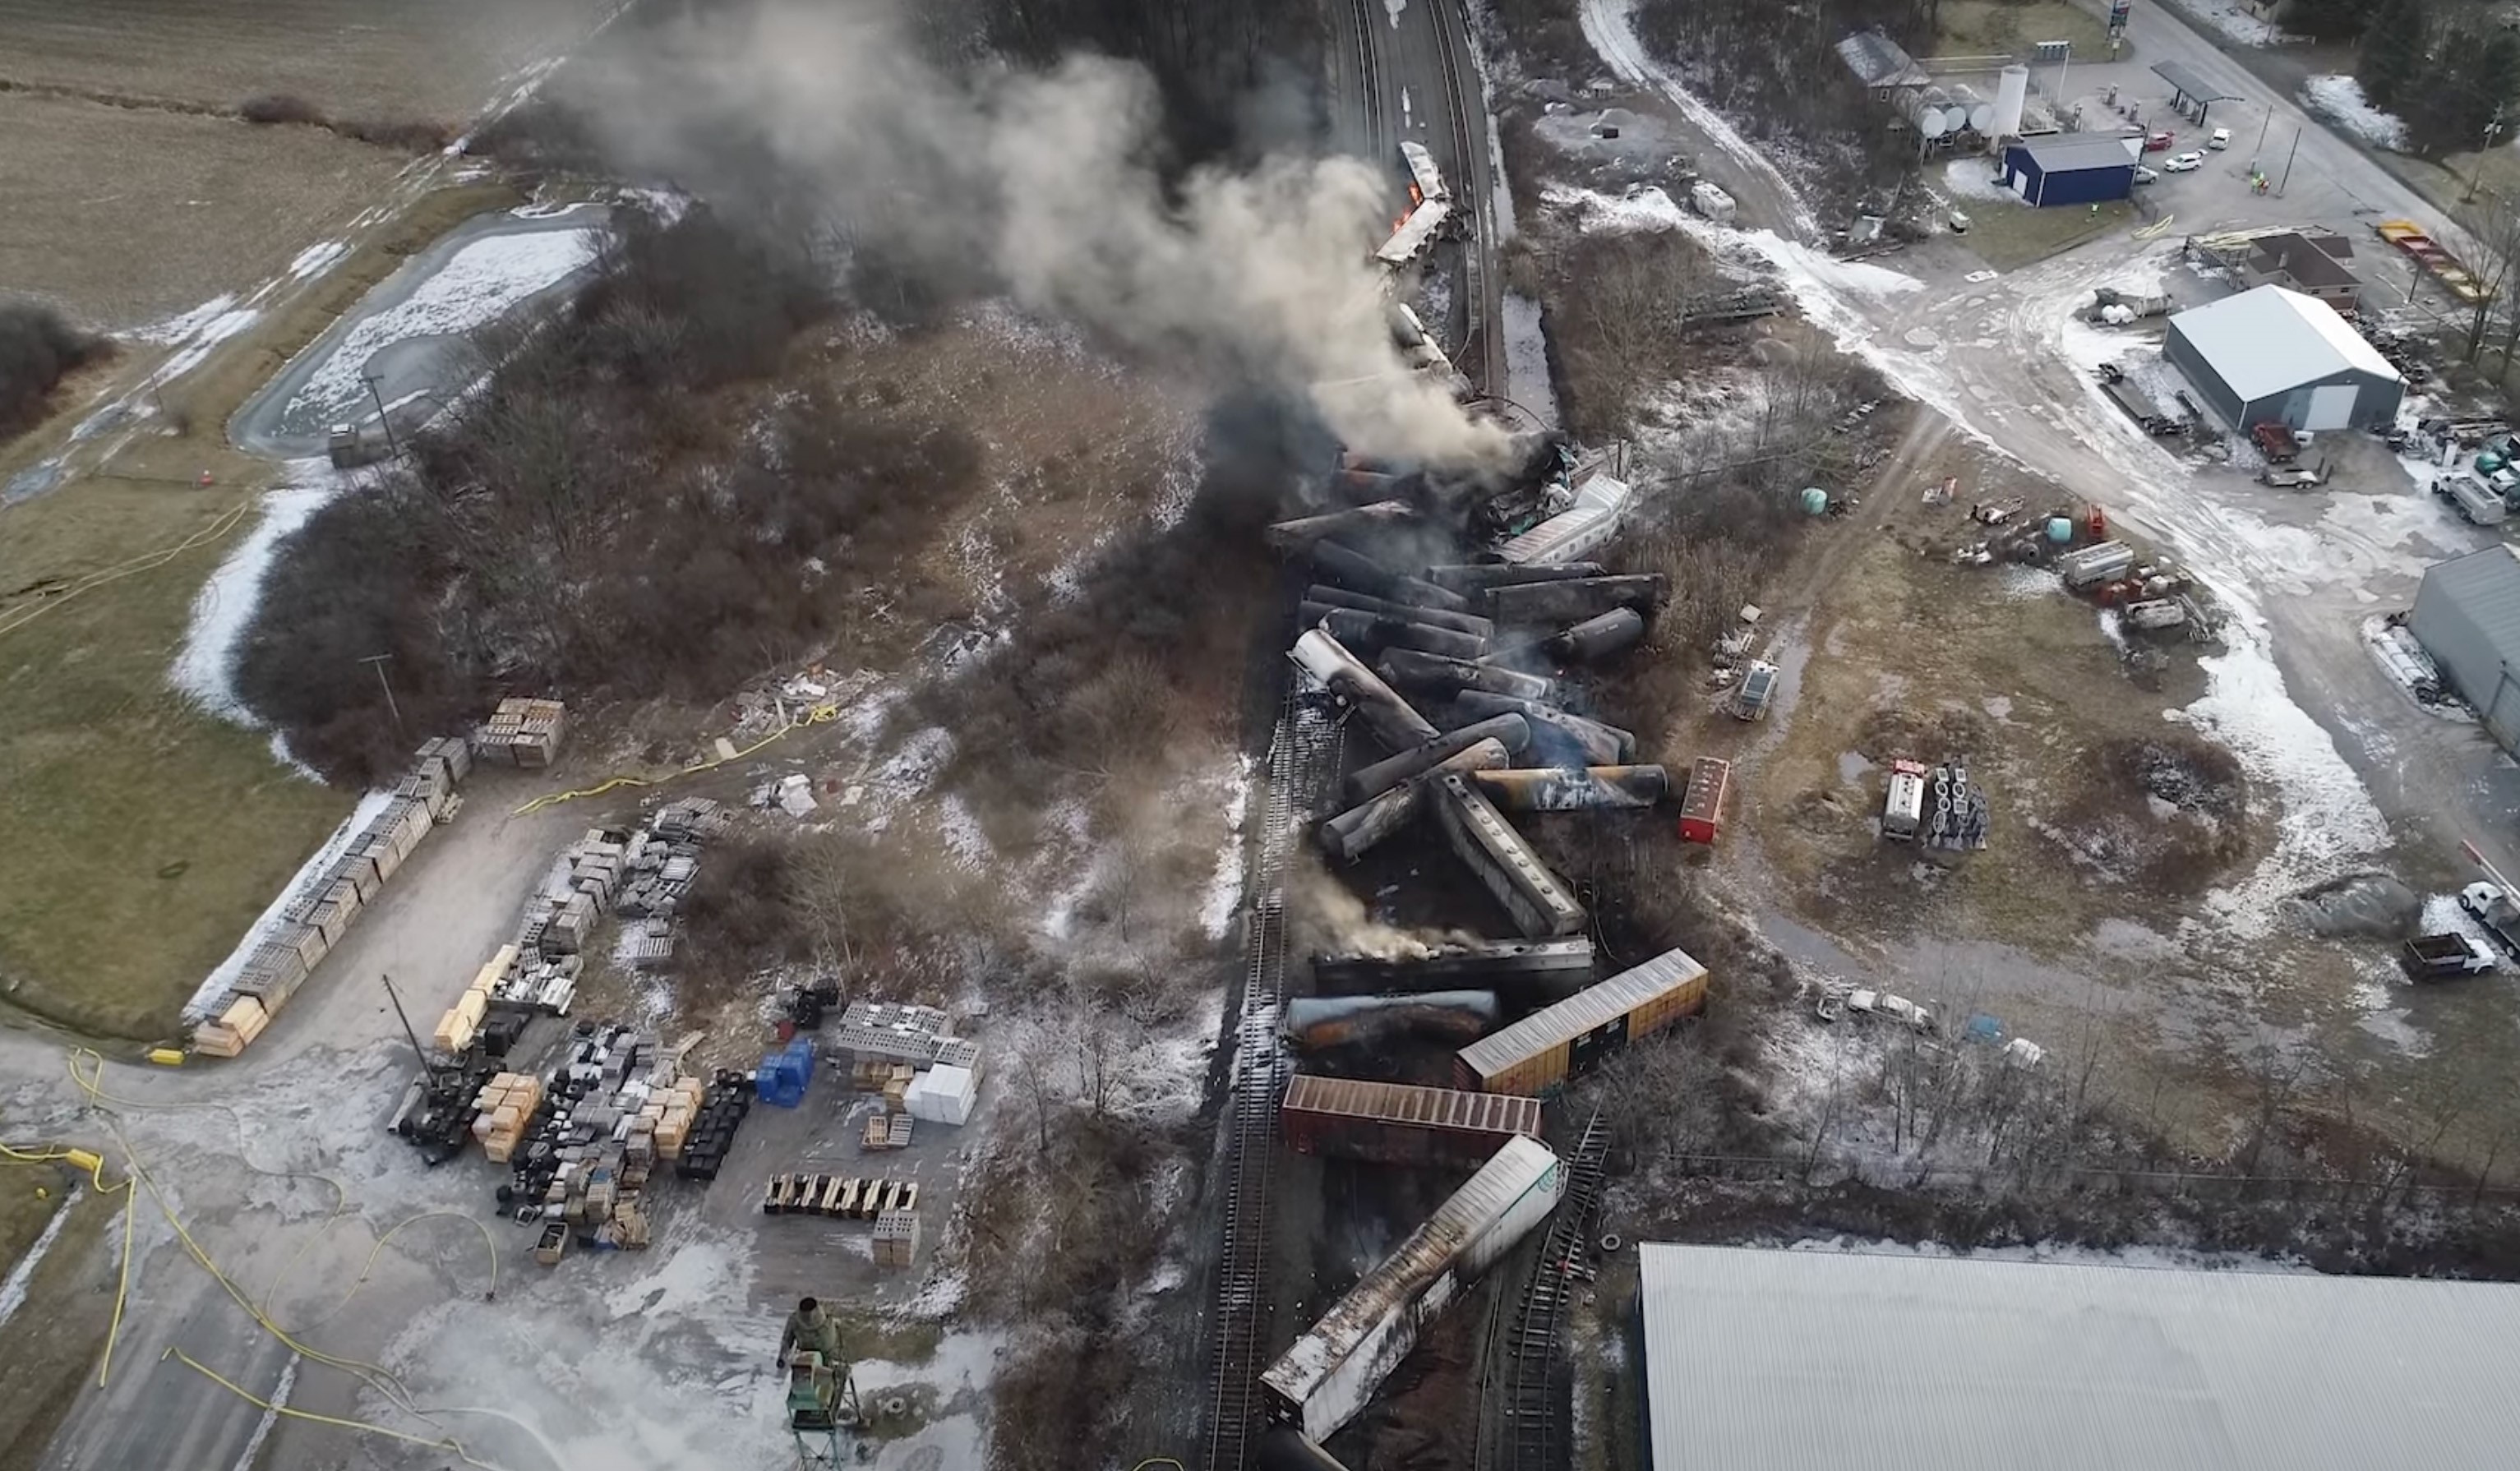 The site of a derailed freight train in East Palestine, Ohio in February.